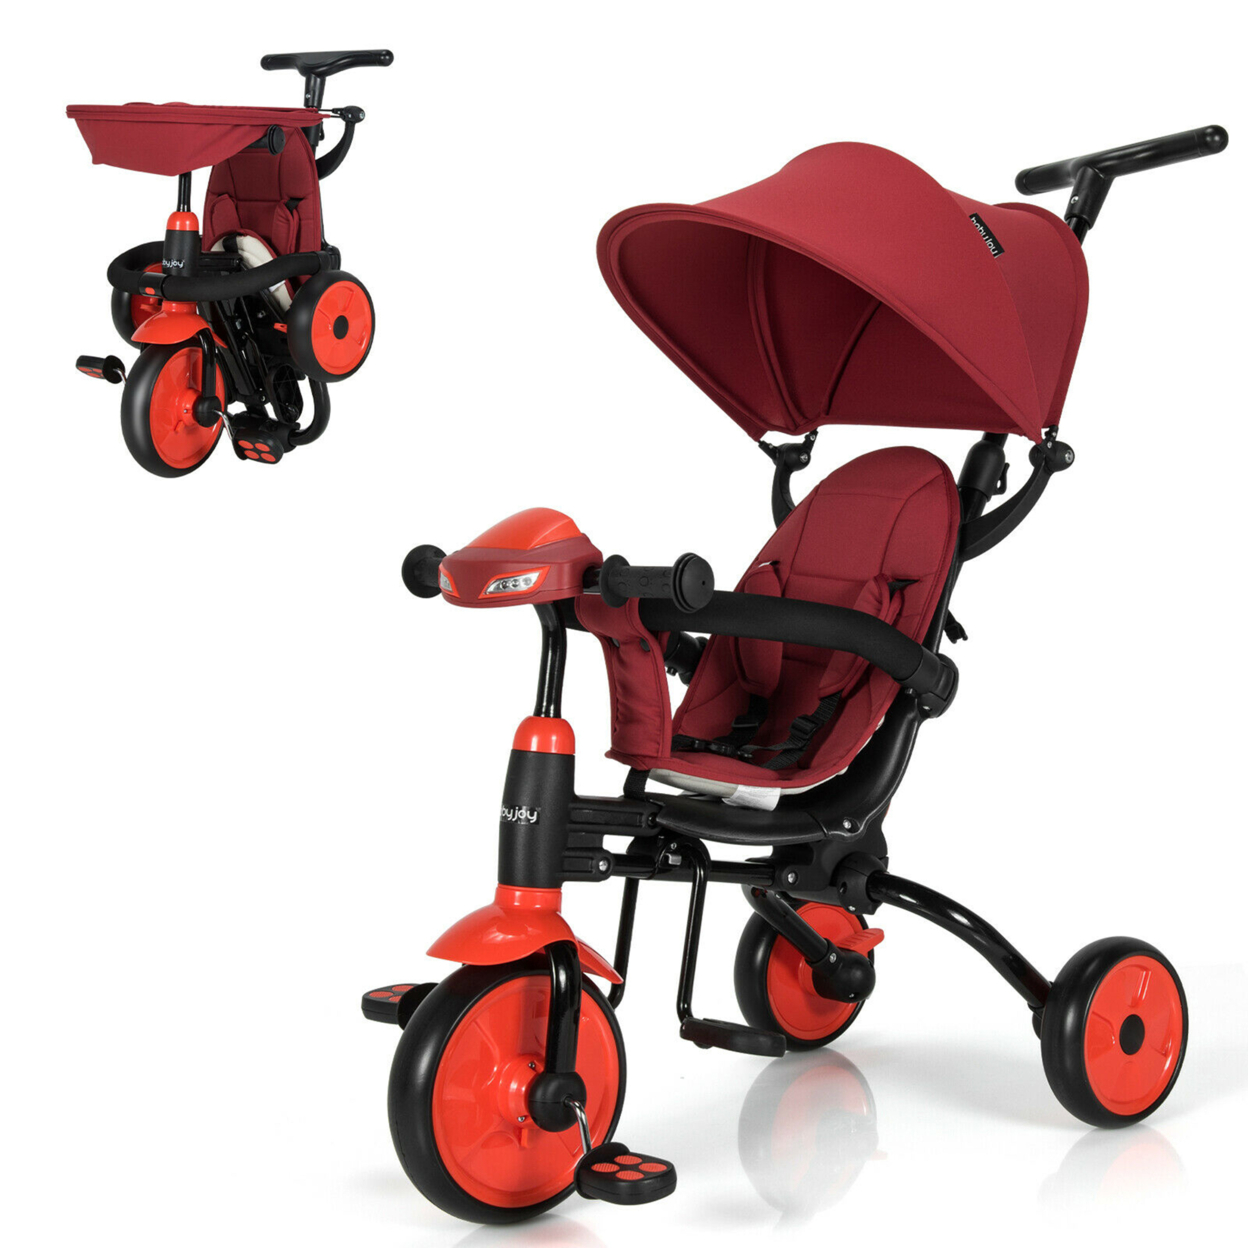 6-in-1 Foldable Baby Tricycle Toddler Bike Stroller W/ Adjustable Handle - Red